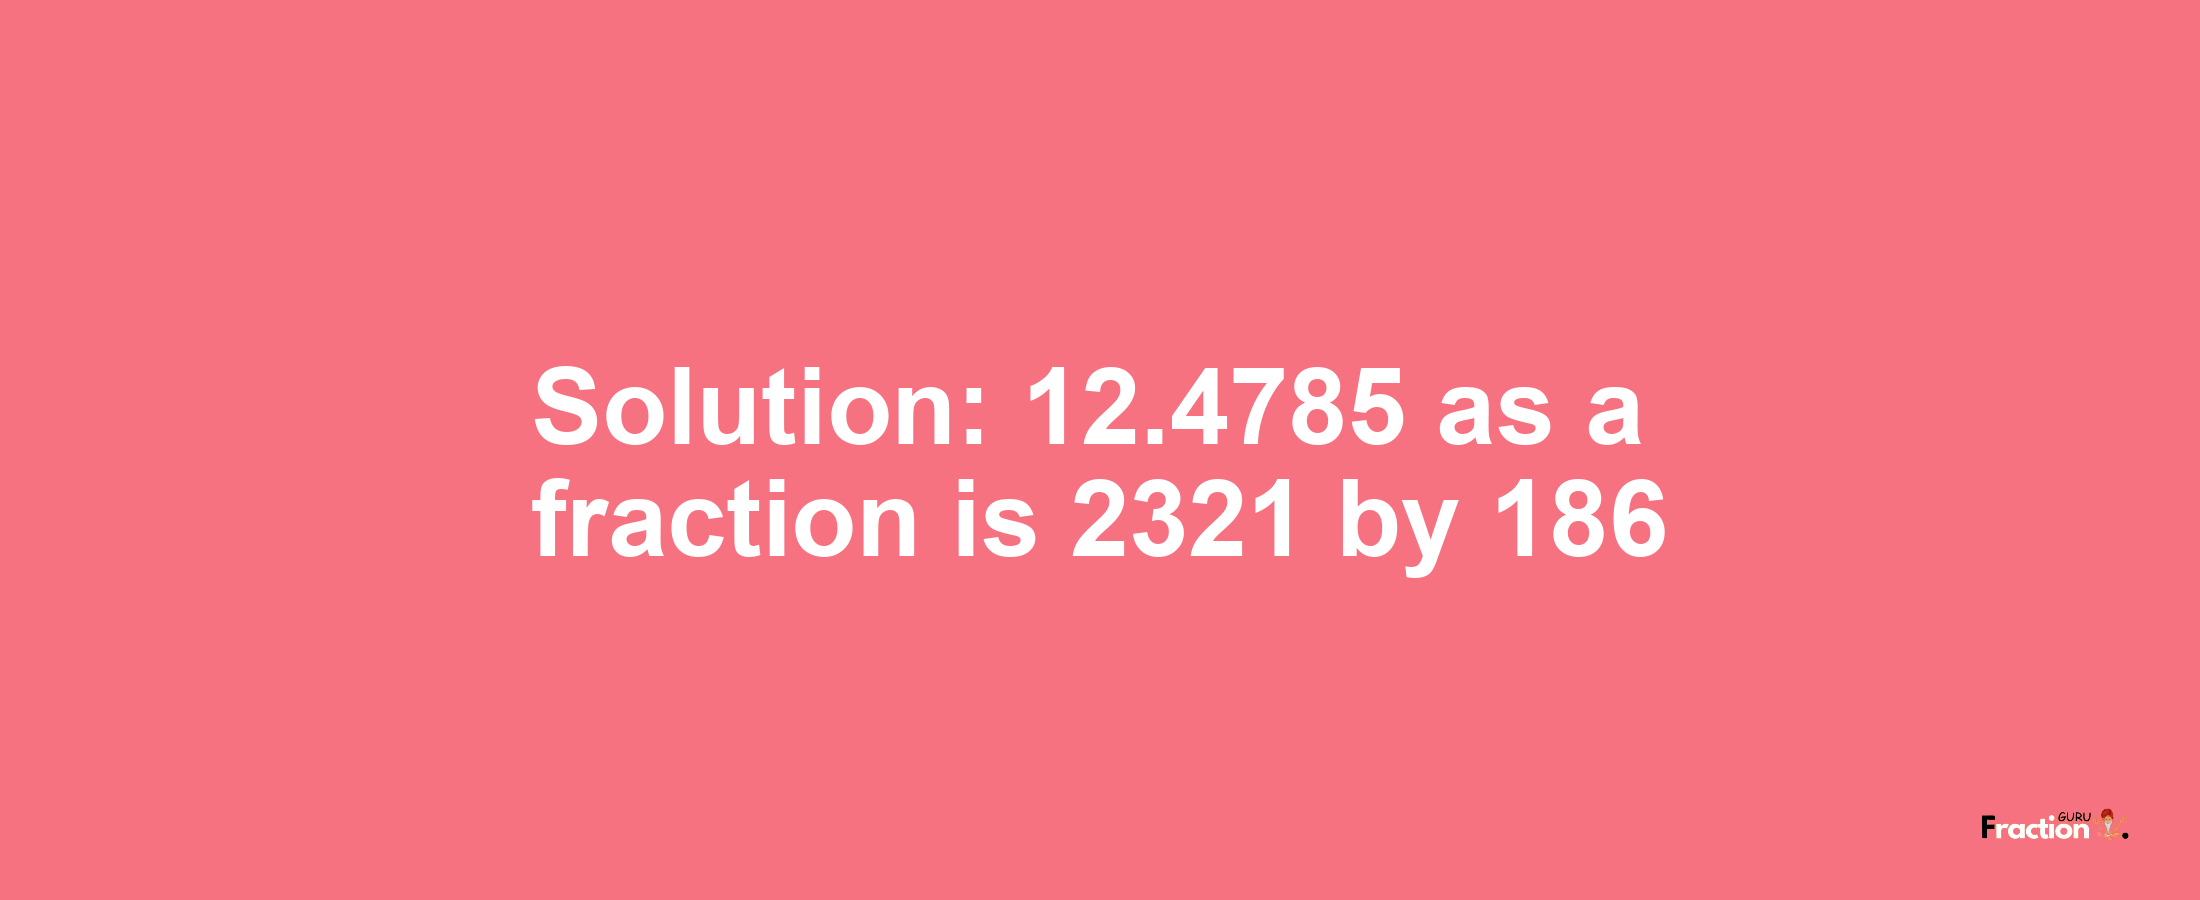 Solution:12.4785 as a fraction is 2321/186